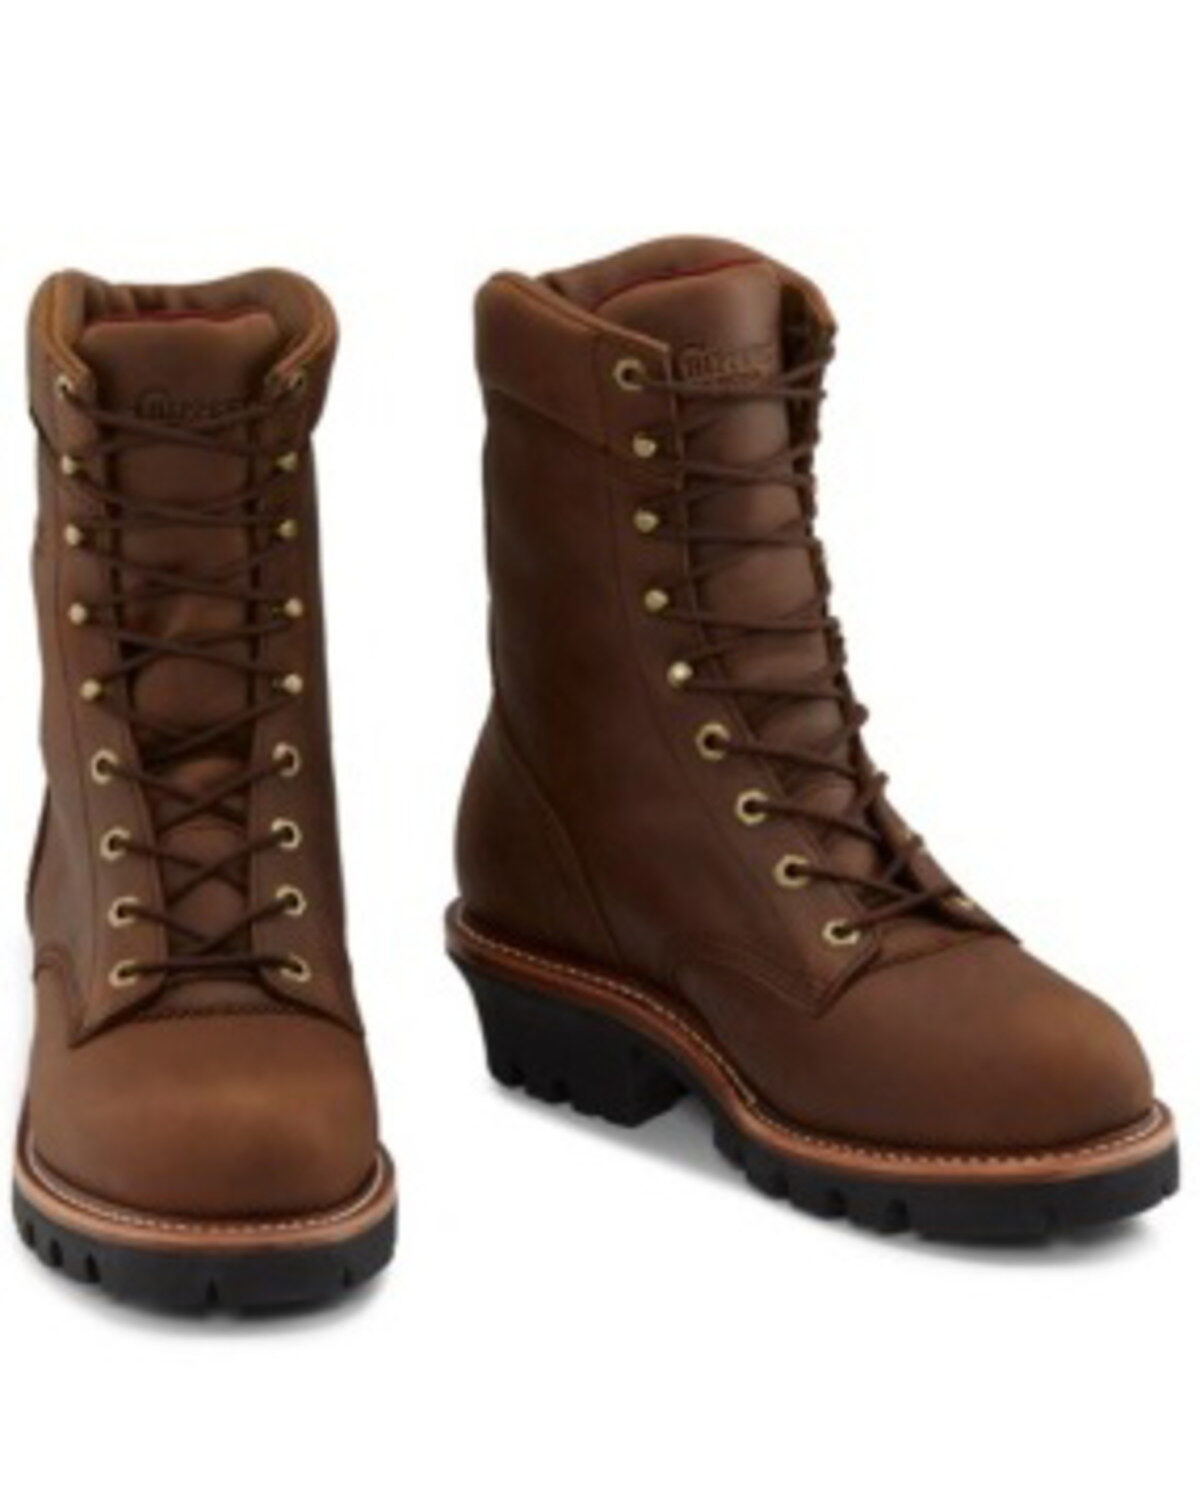 chippewas boots